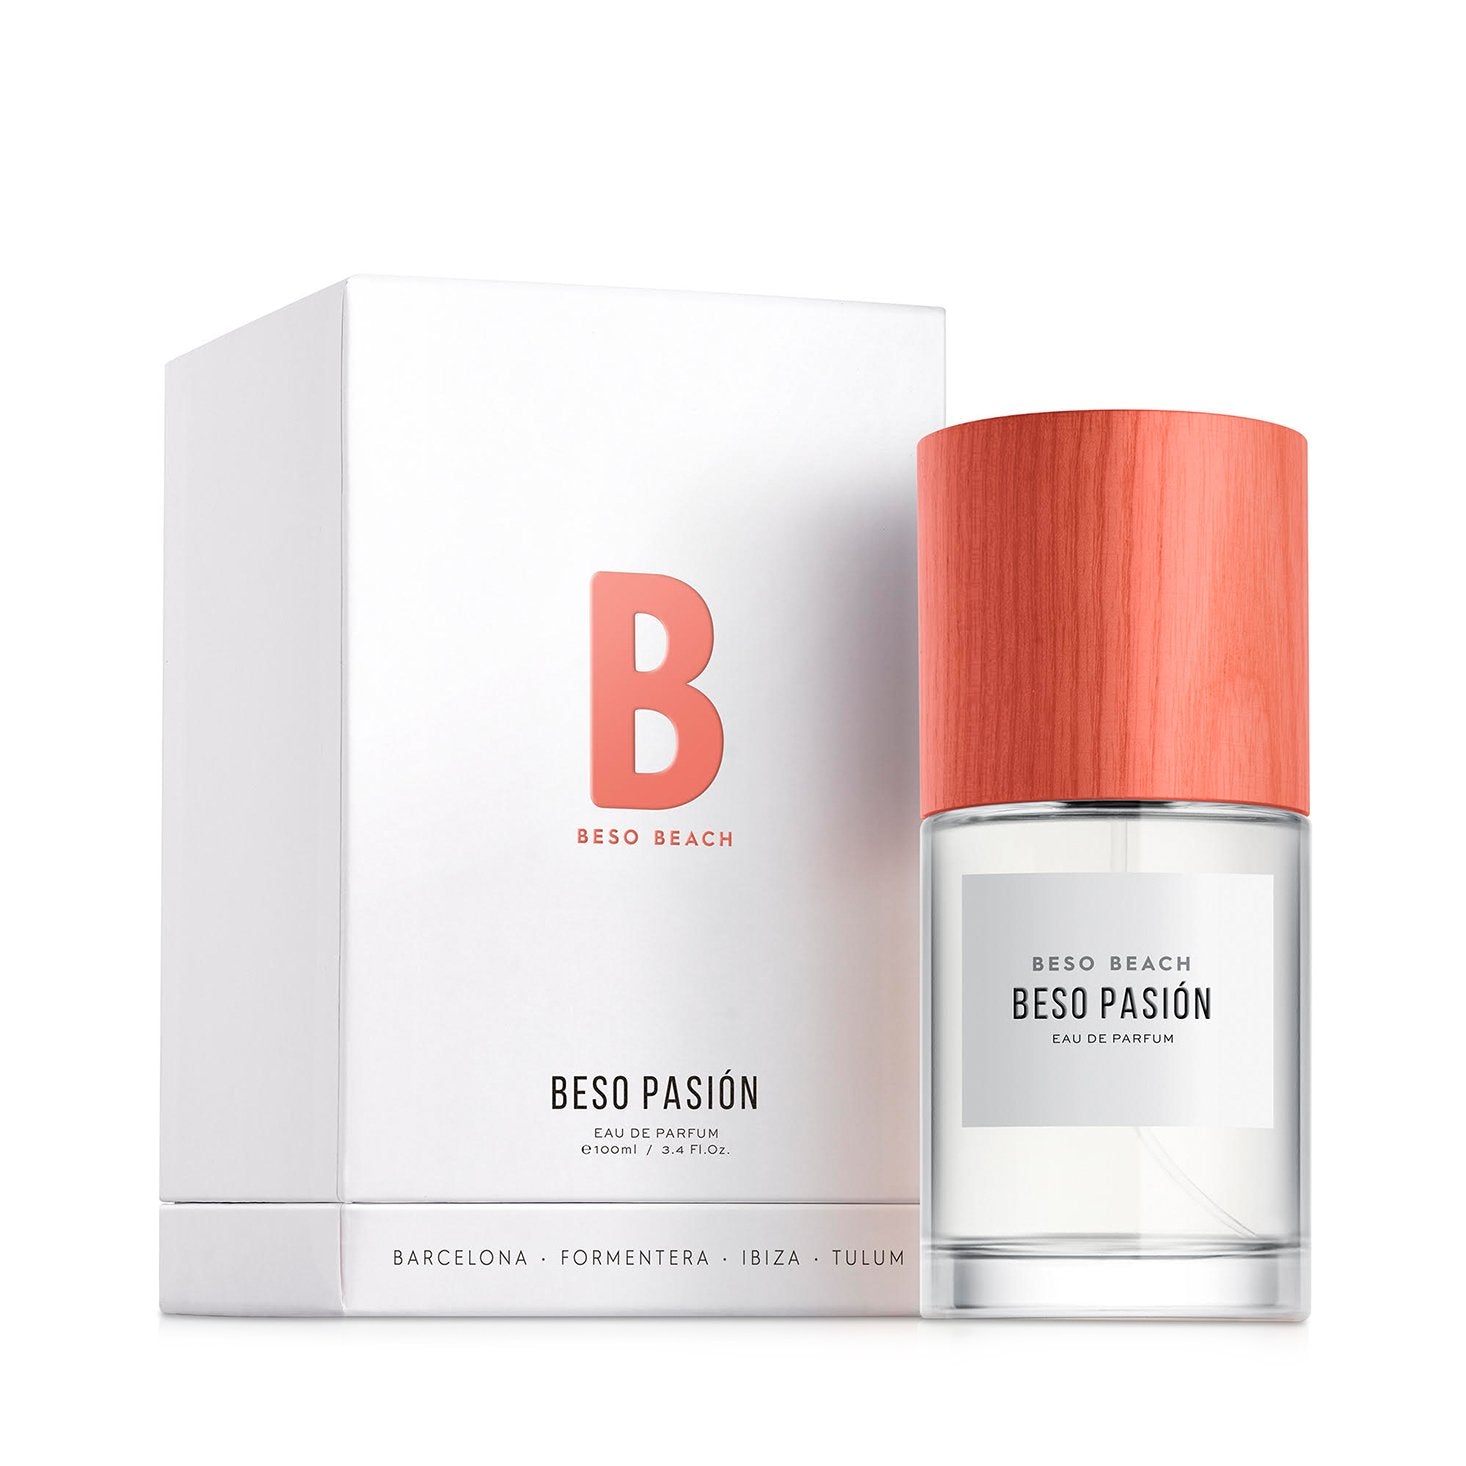 BEON.COM.AU Beso Pasion takes inspiration from sweet summer breezes that caress the coastline Mediterranean islands. The breeze is infused with sea salt, and the delicious aroma of fig trees, and layered with fragrant grass cured by the hot sun. Created by renowned perfumer Jordi Fernández for Besi Beach. 10... Beso Beach at BEON.COM.AU